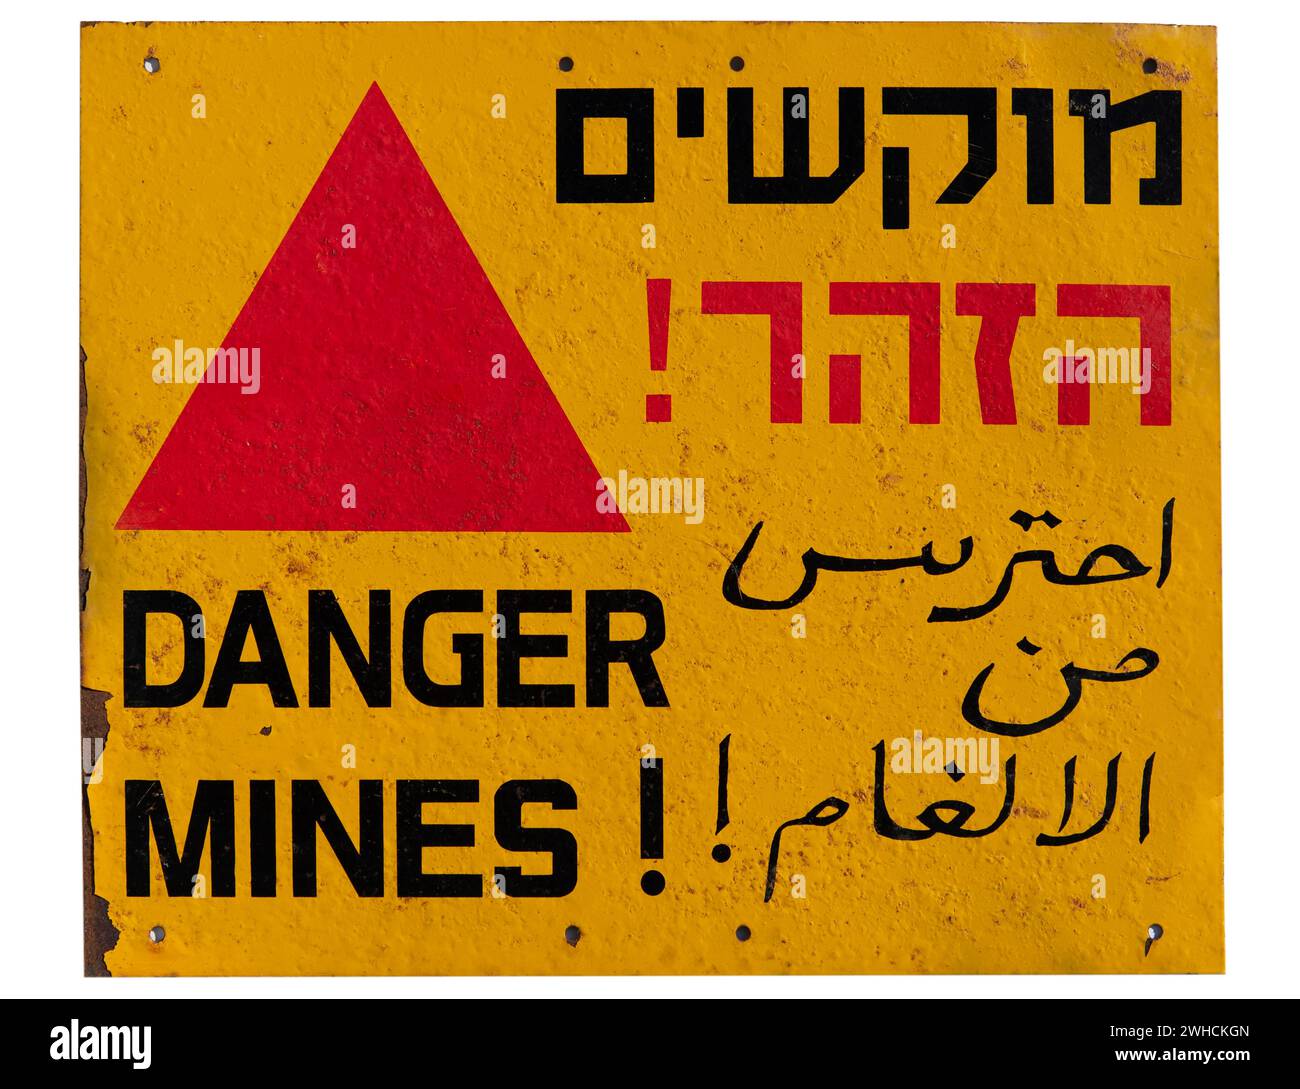 Warning sign about danger of explosion from mines, West Bank, Israel Stock Photo